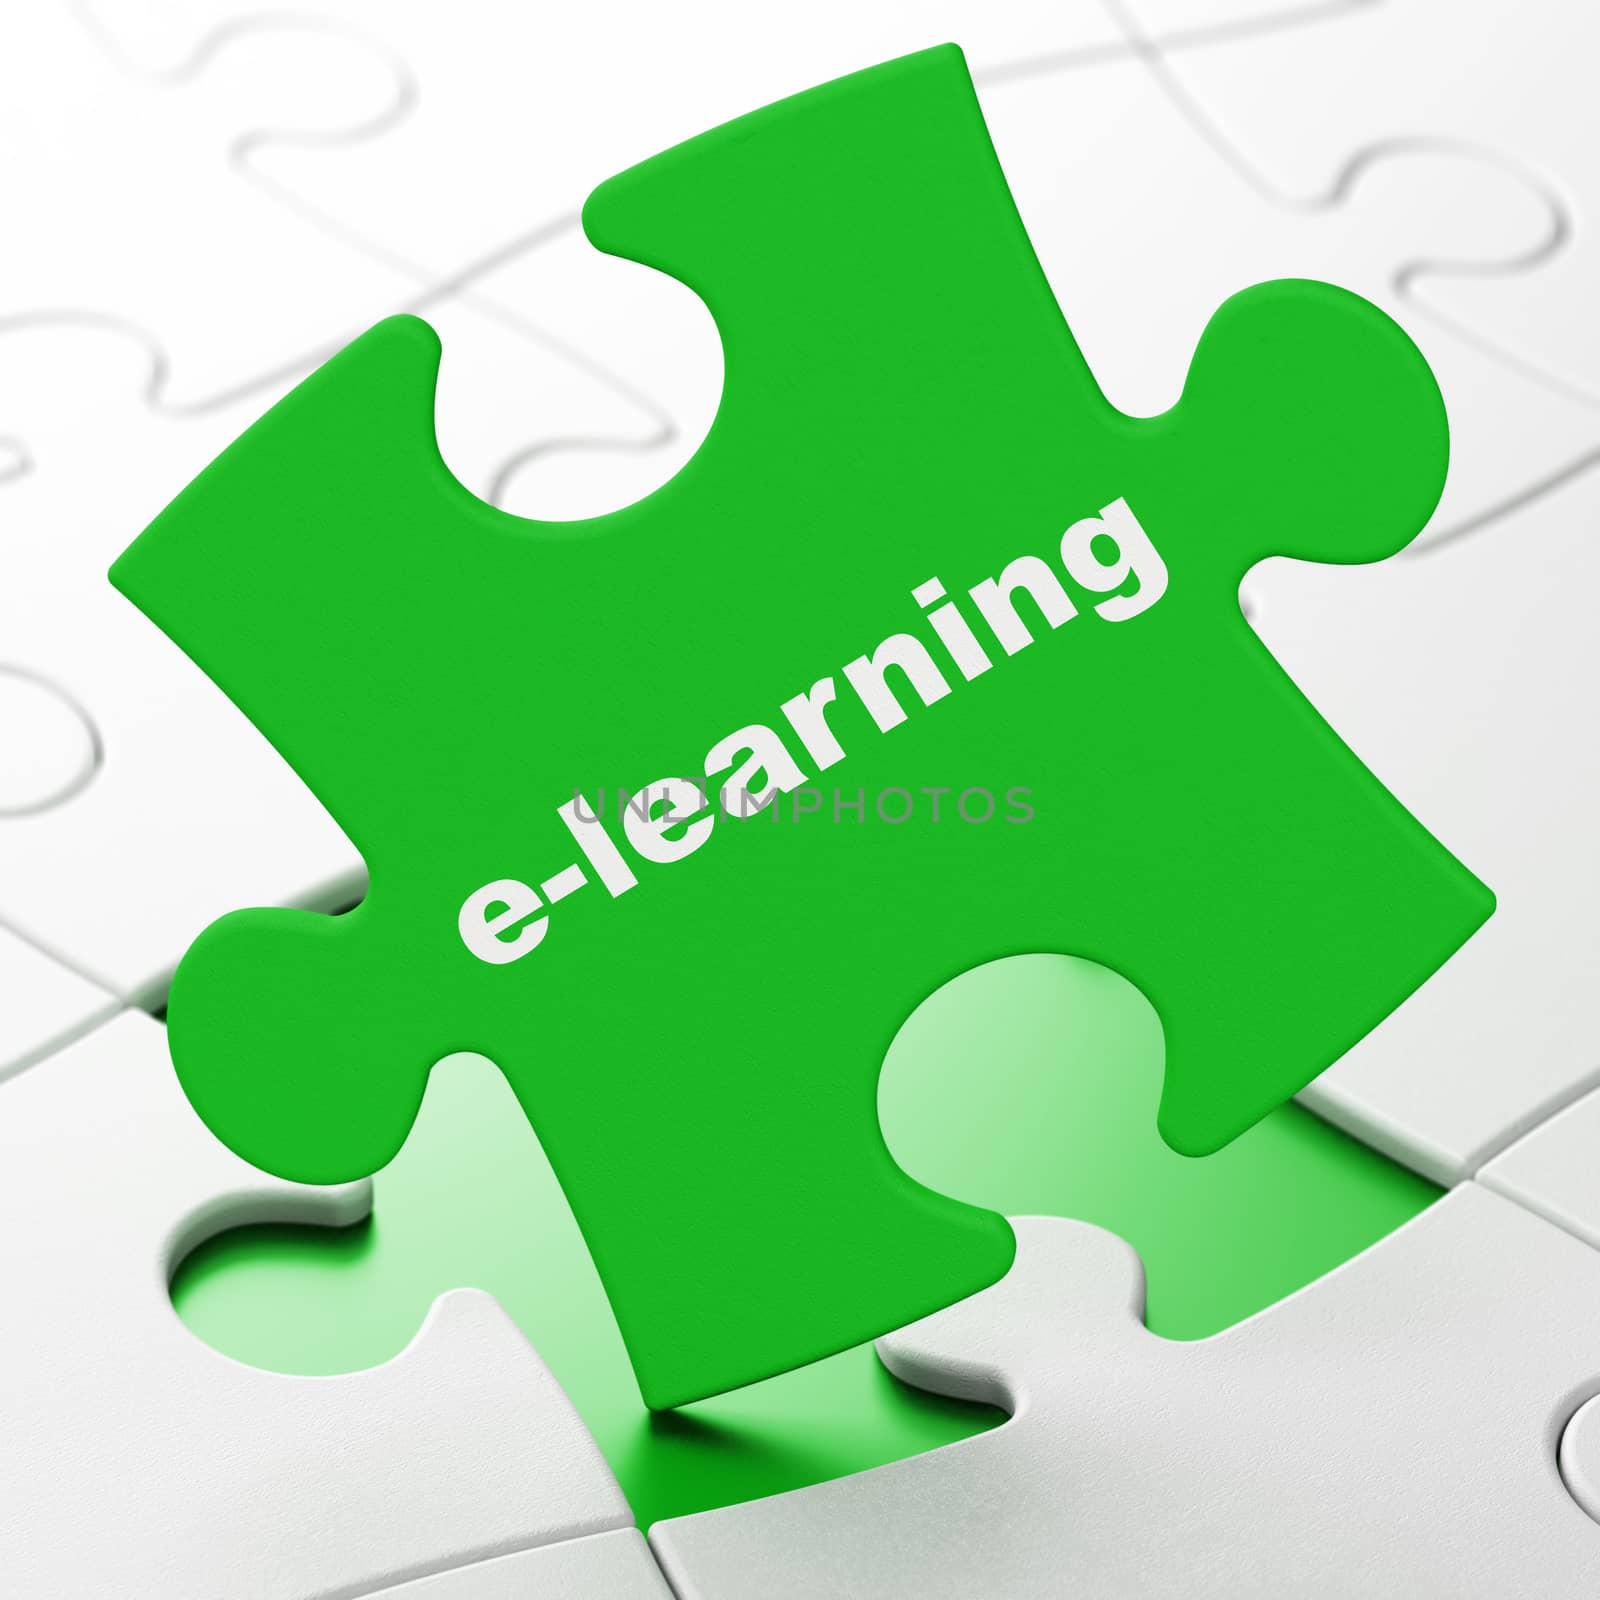 Studying concept: E-learning on Green puzzle pieces background, 3d render